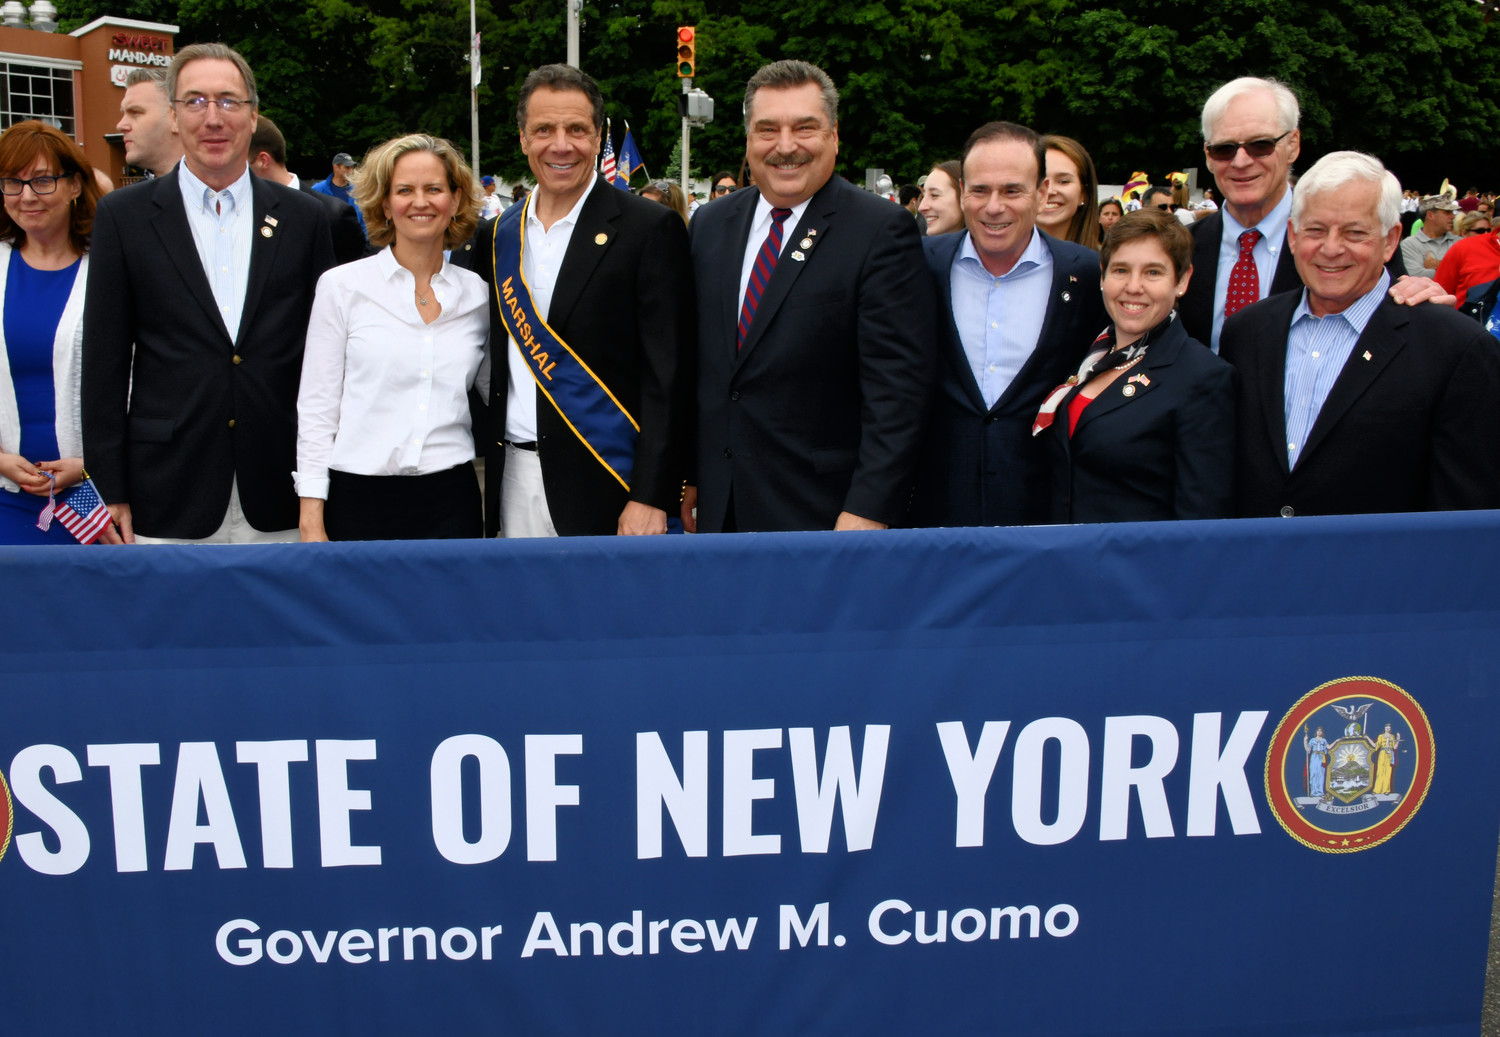 Cuomo swings by Glen Cove's Memorial Day parade, rankling local GOP